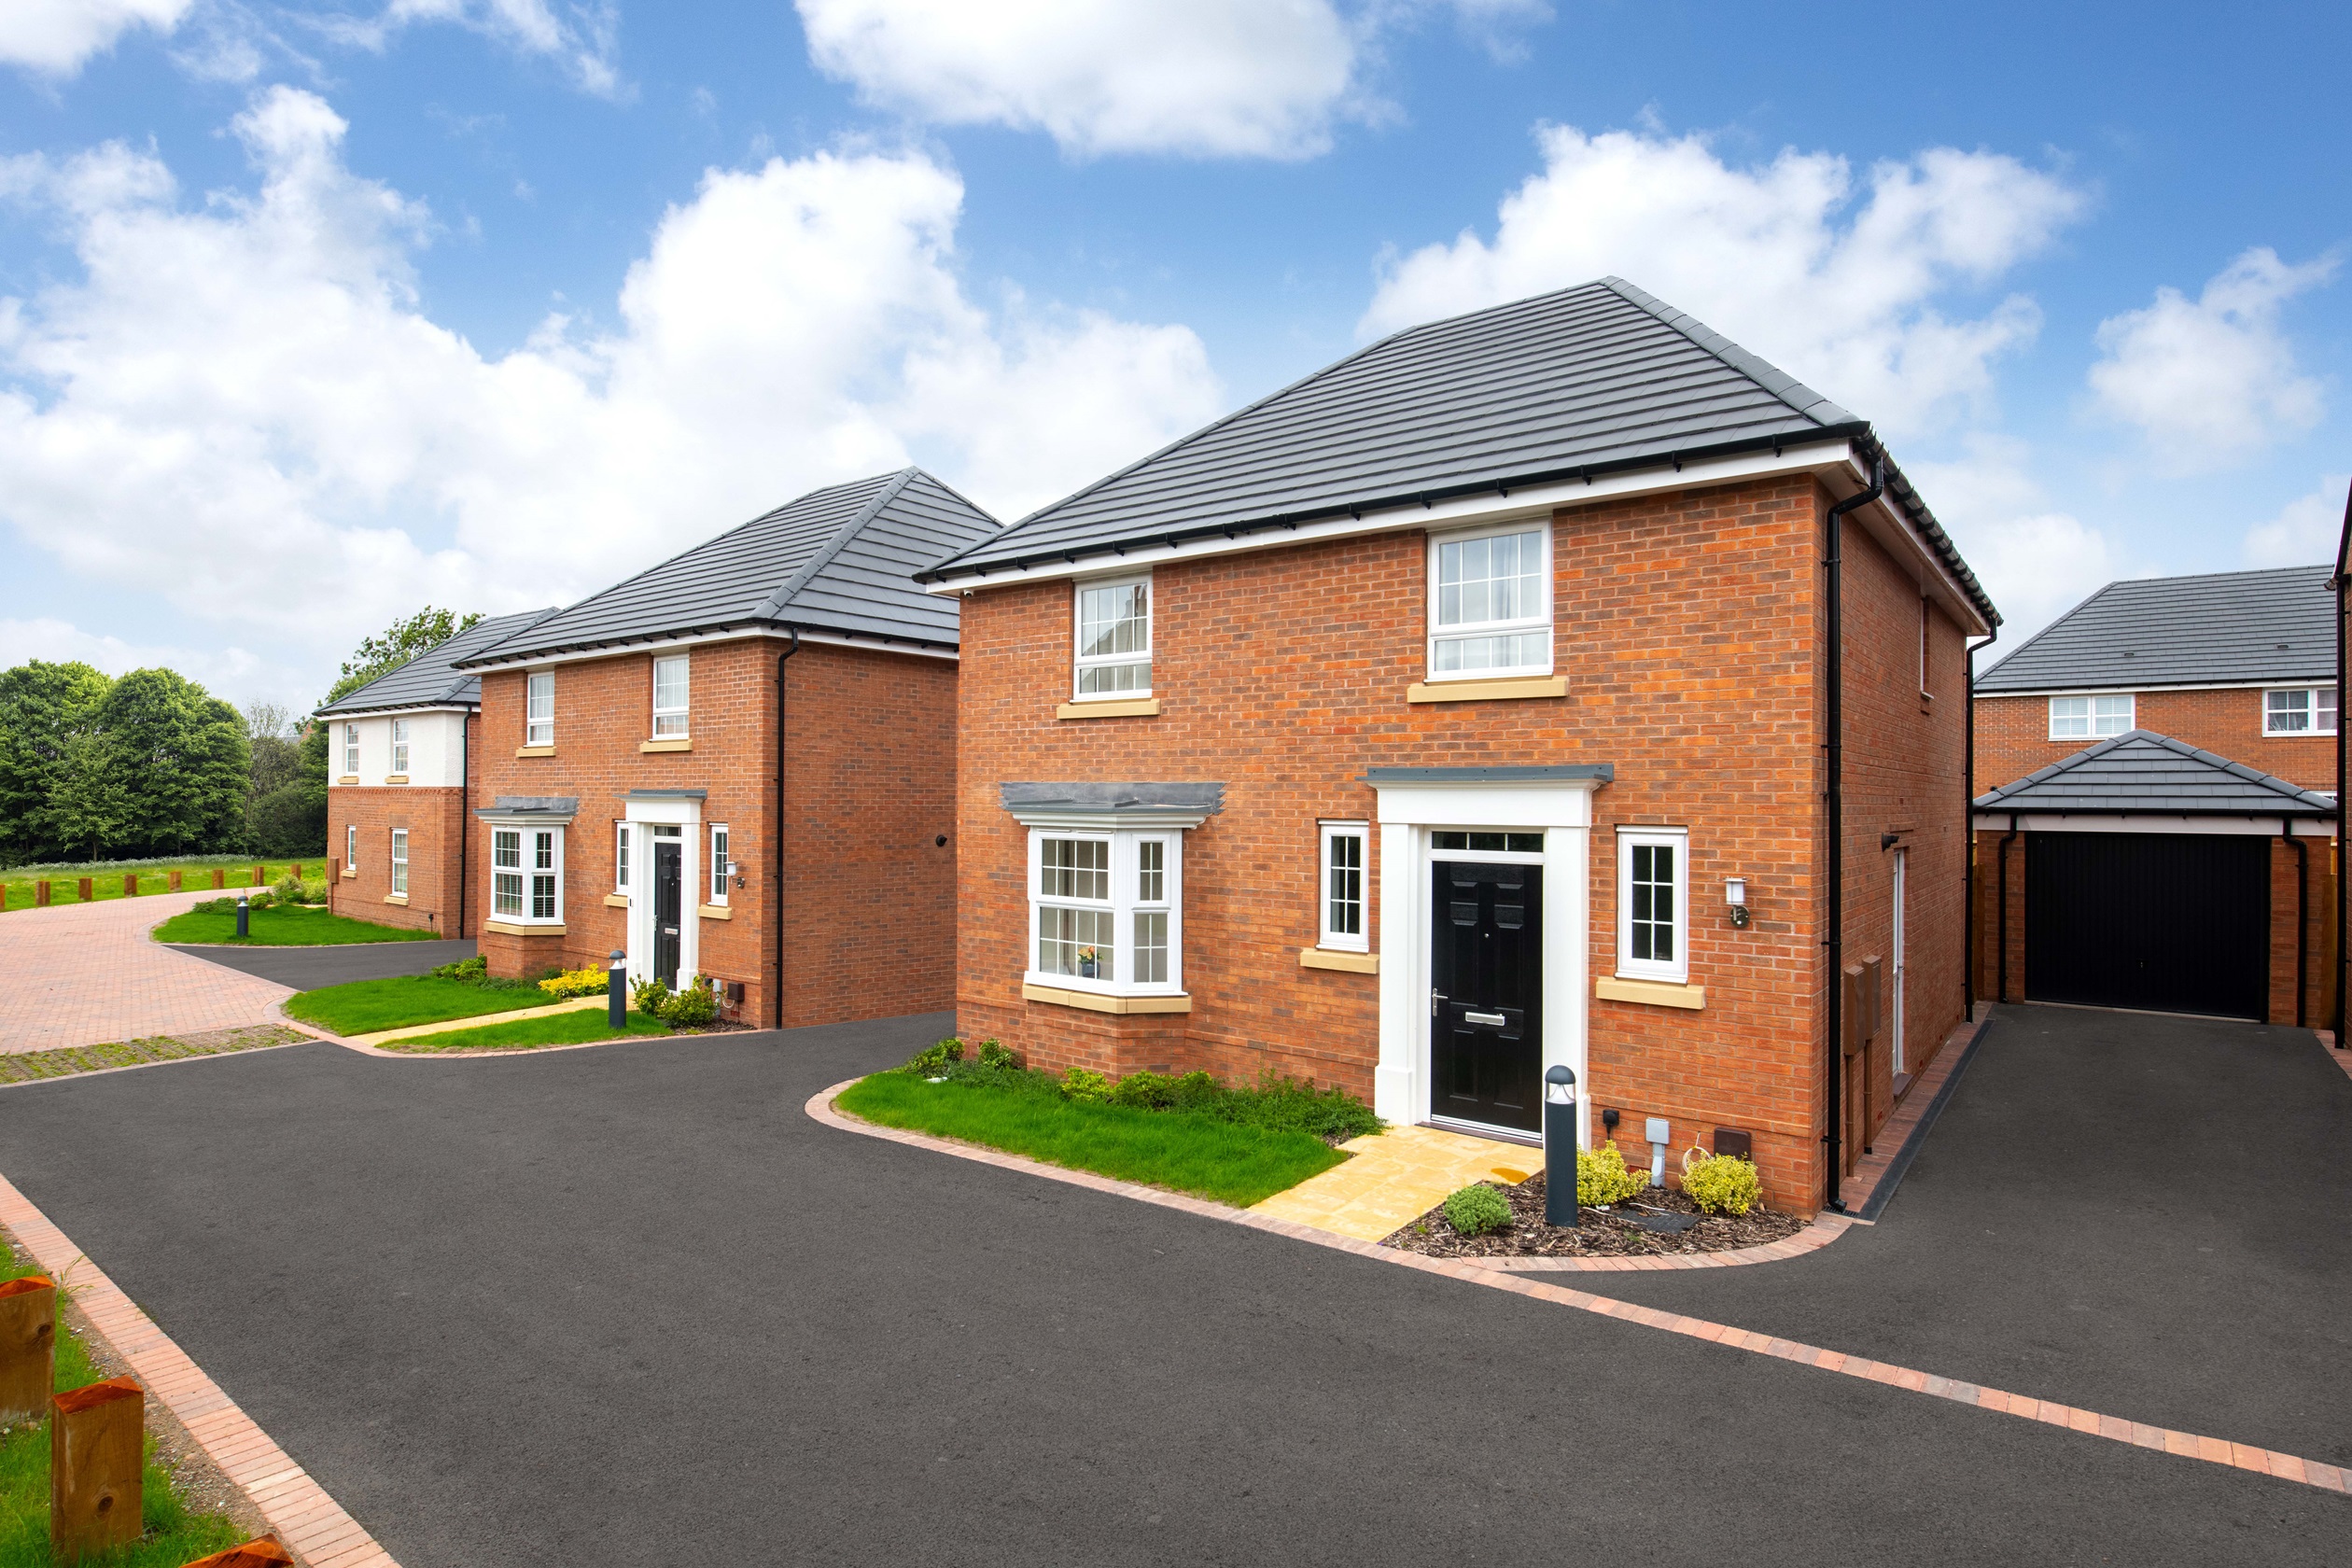 Property 1 of 10. External View Of Brand-New Homes At Thorpebury In The Limes